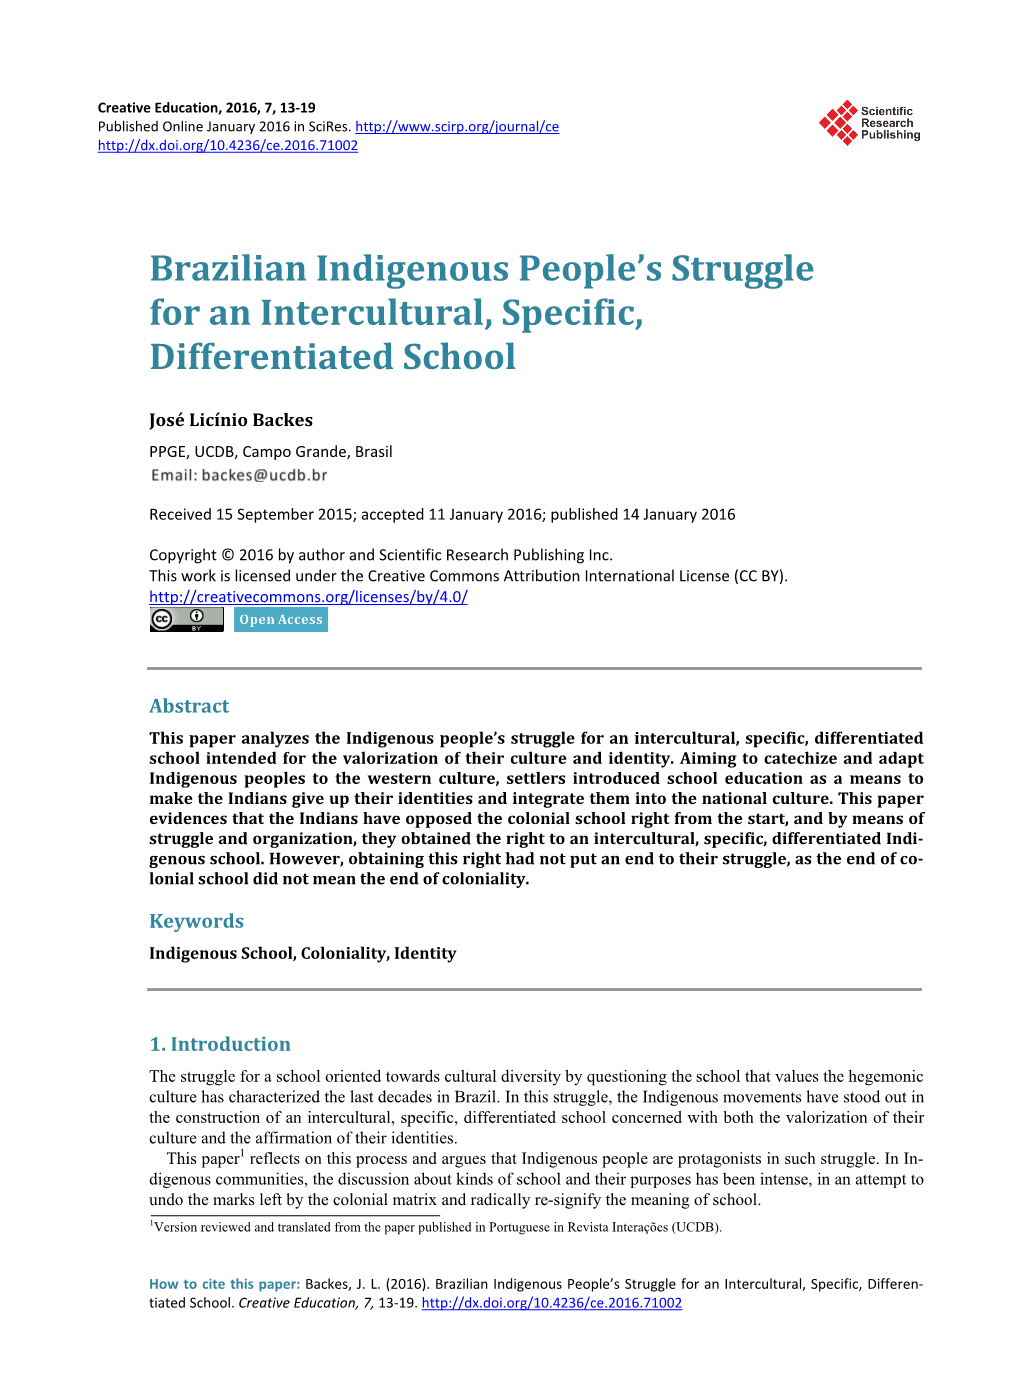 Brazilian Indigenous People's Struggle for an Intercultural, Specific